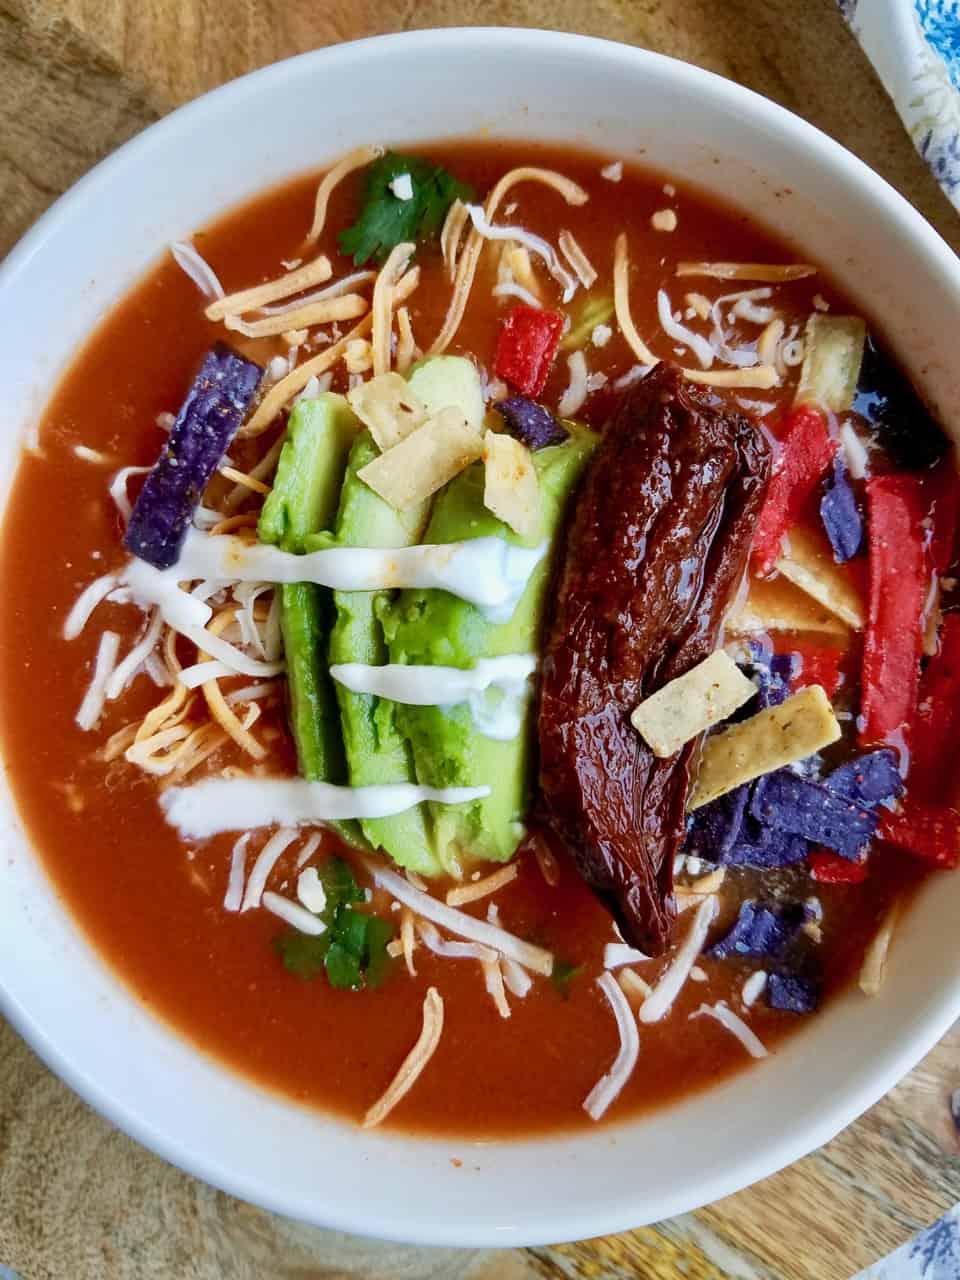 Chipotle Tortilla Soup is simple to make, easy to customize, and bursting with smokey chipotle flavor. It's a family favorite that is made year round, even in the hot summer months, because we can't go with out it. It is by far the BEST tortilla soup! You have to try it out. I absolutely promise you won't regret it! | We Three Shanes